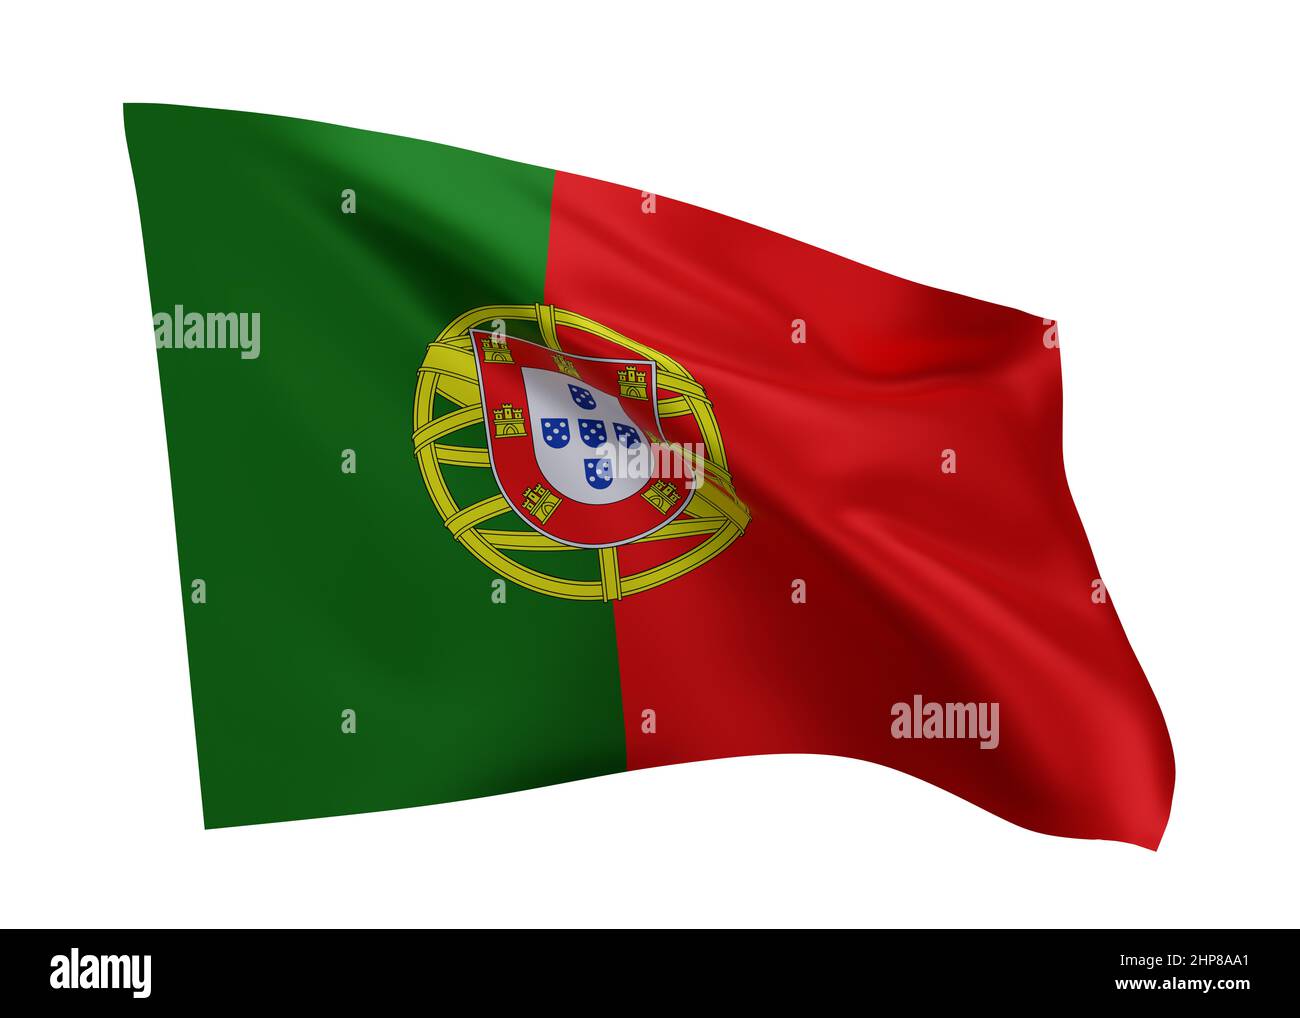 3d illustration flag of Portugal. Portuguese high resolution flag isolated against white background. 3d rendering Stock Photo